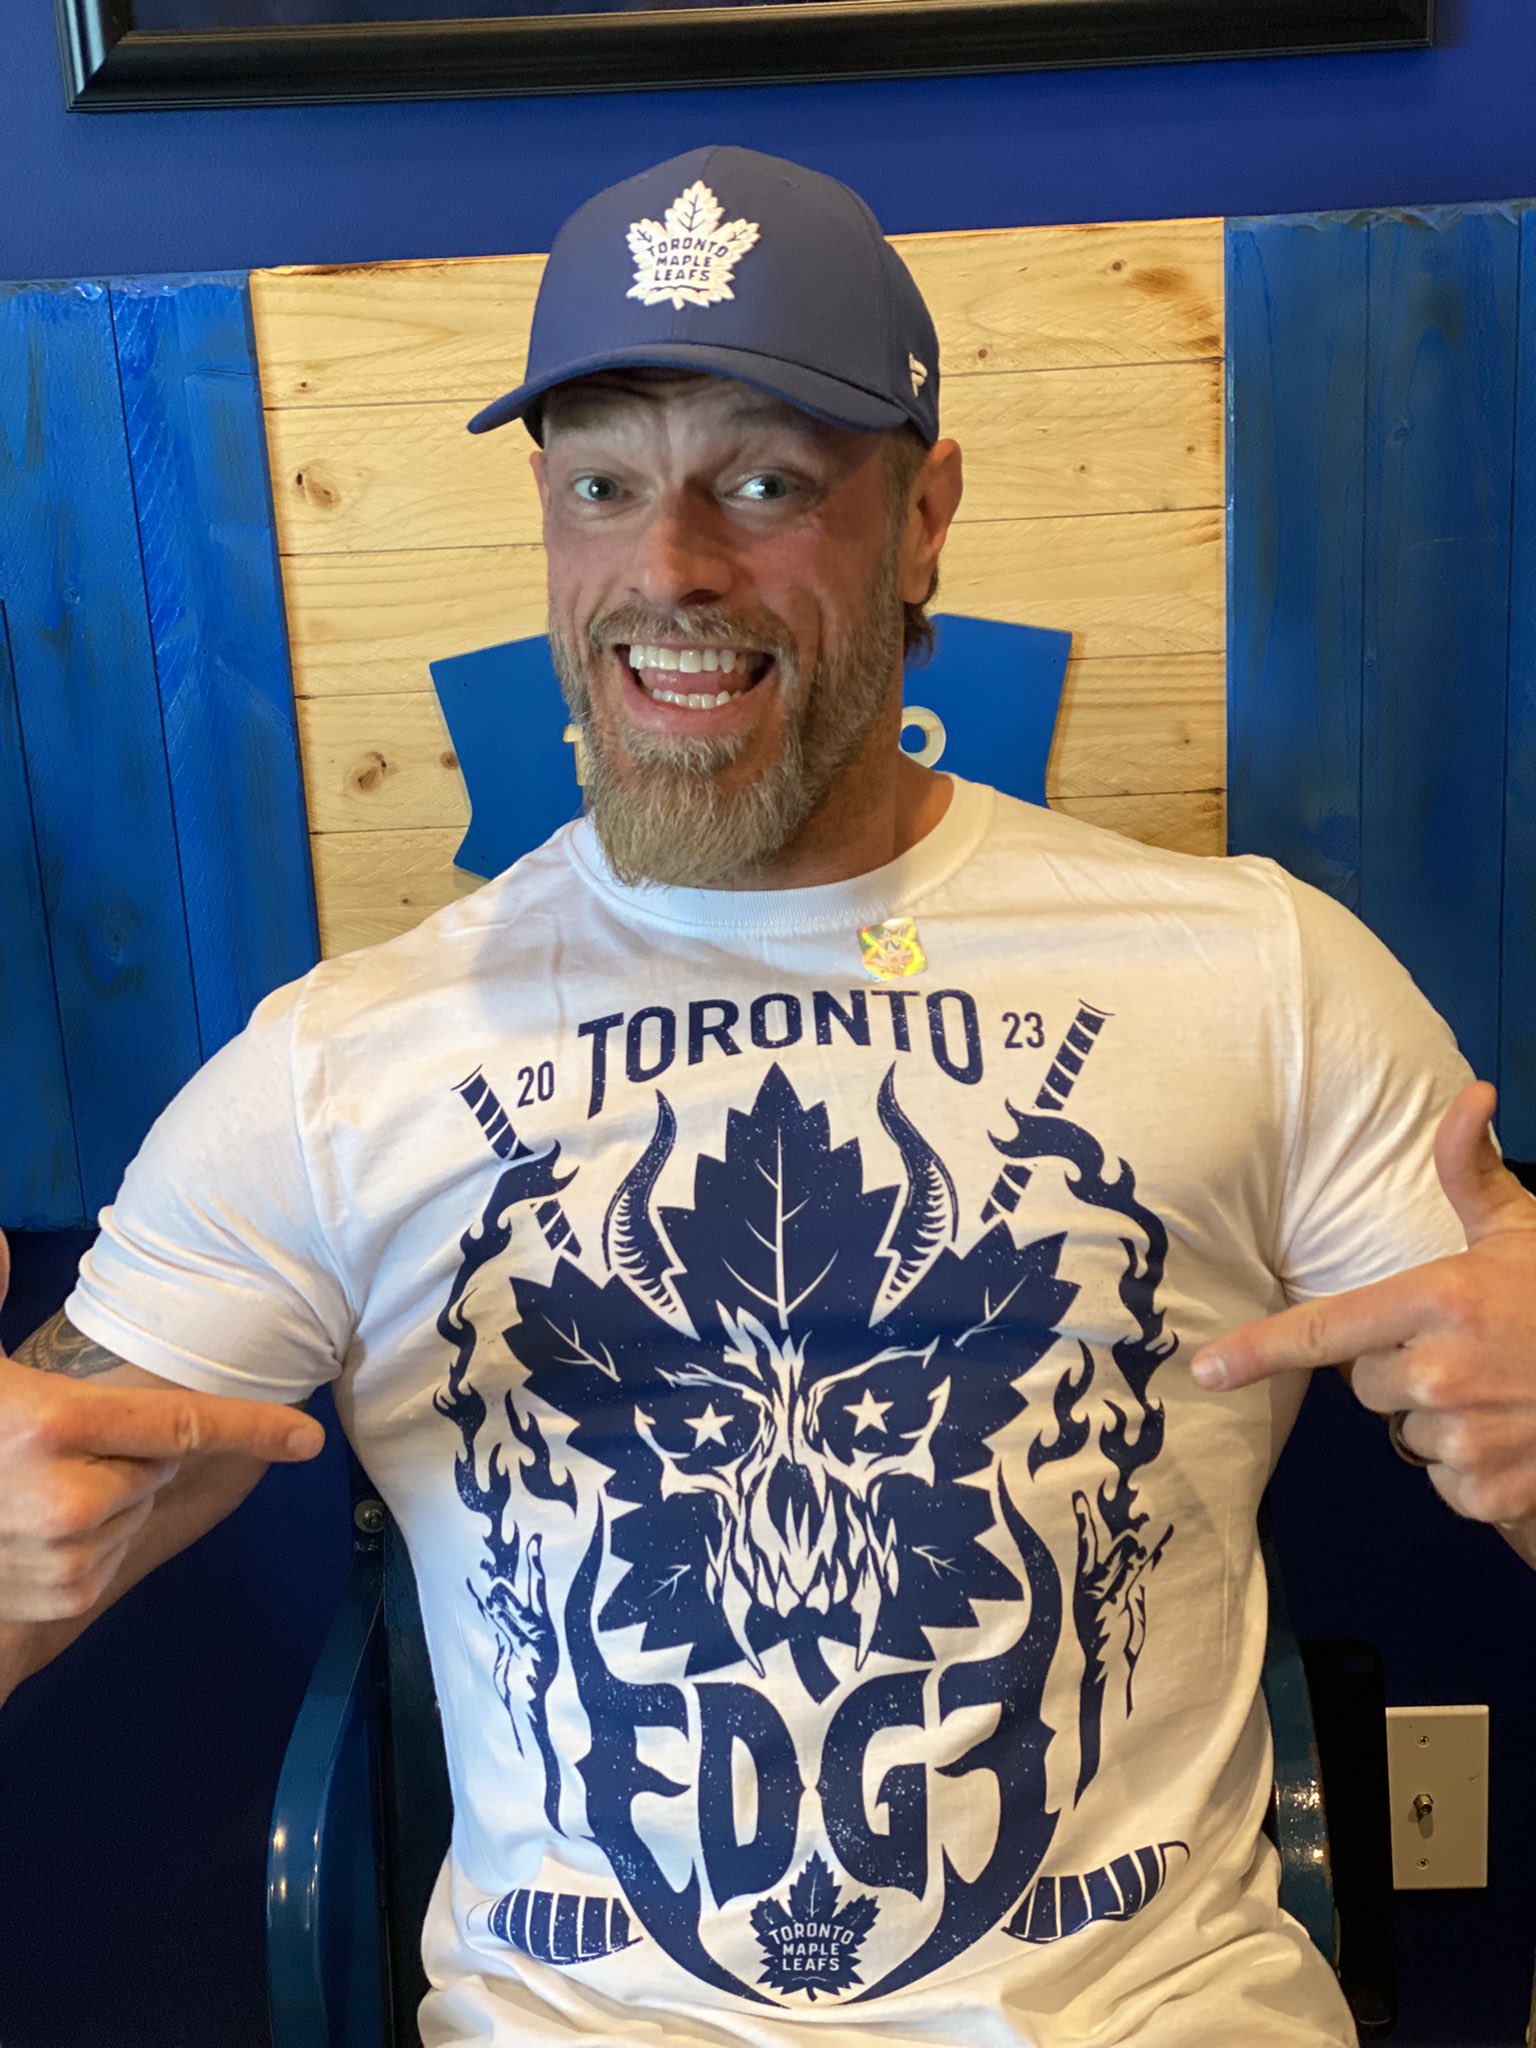 WWE Superstar Edge and Maple Leafs Collaborate On Another New Shirt Ahead  of Smackdown - The Hockey News Toronto Maple Leafs News, Analysis and More